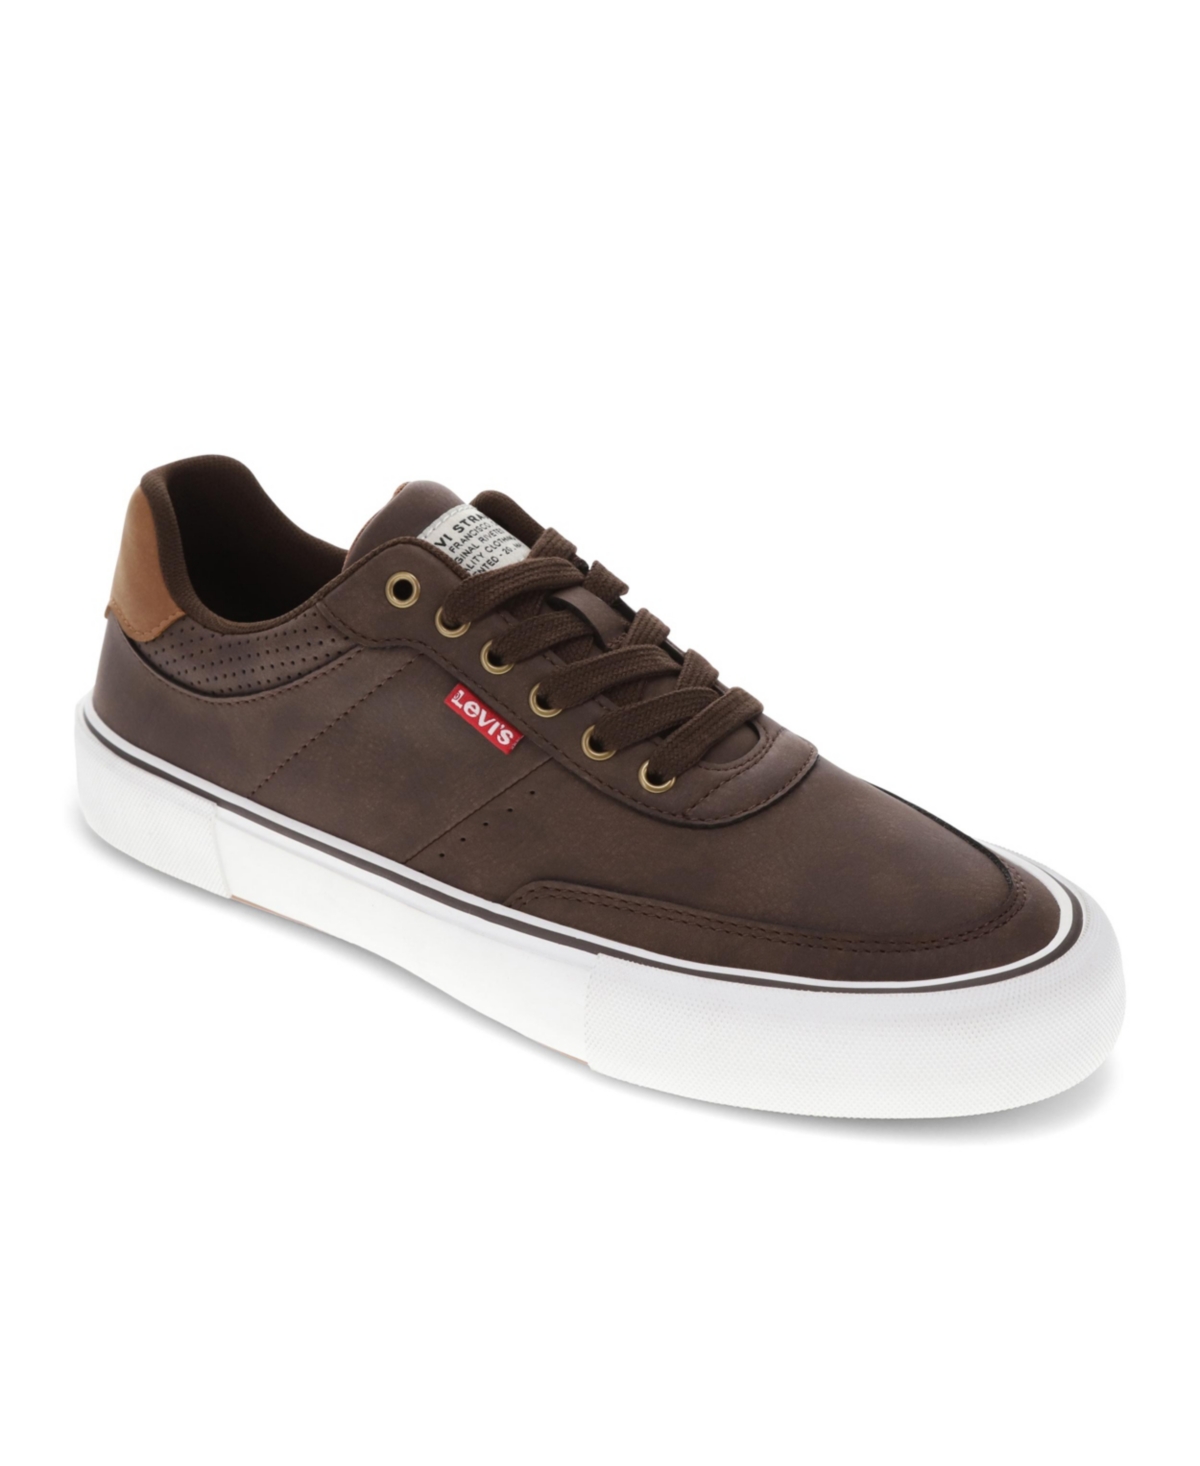 Levi's Men's Munro Ul Faux Leather Lace-up Sneakers Men's Shoes In Brown/tan